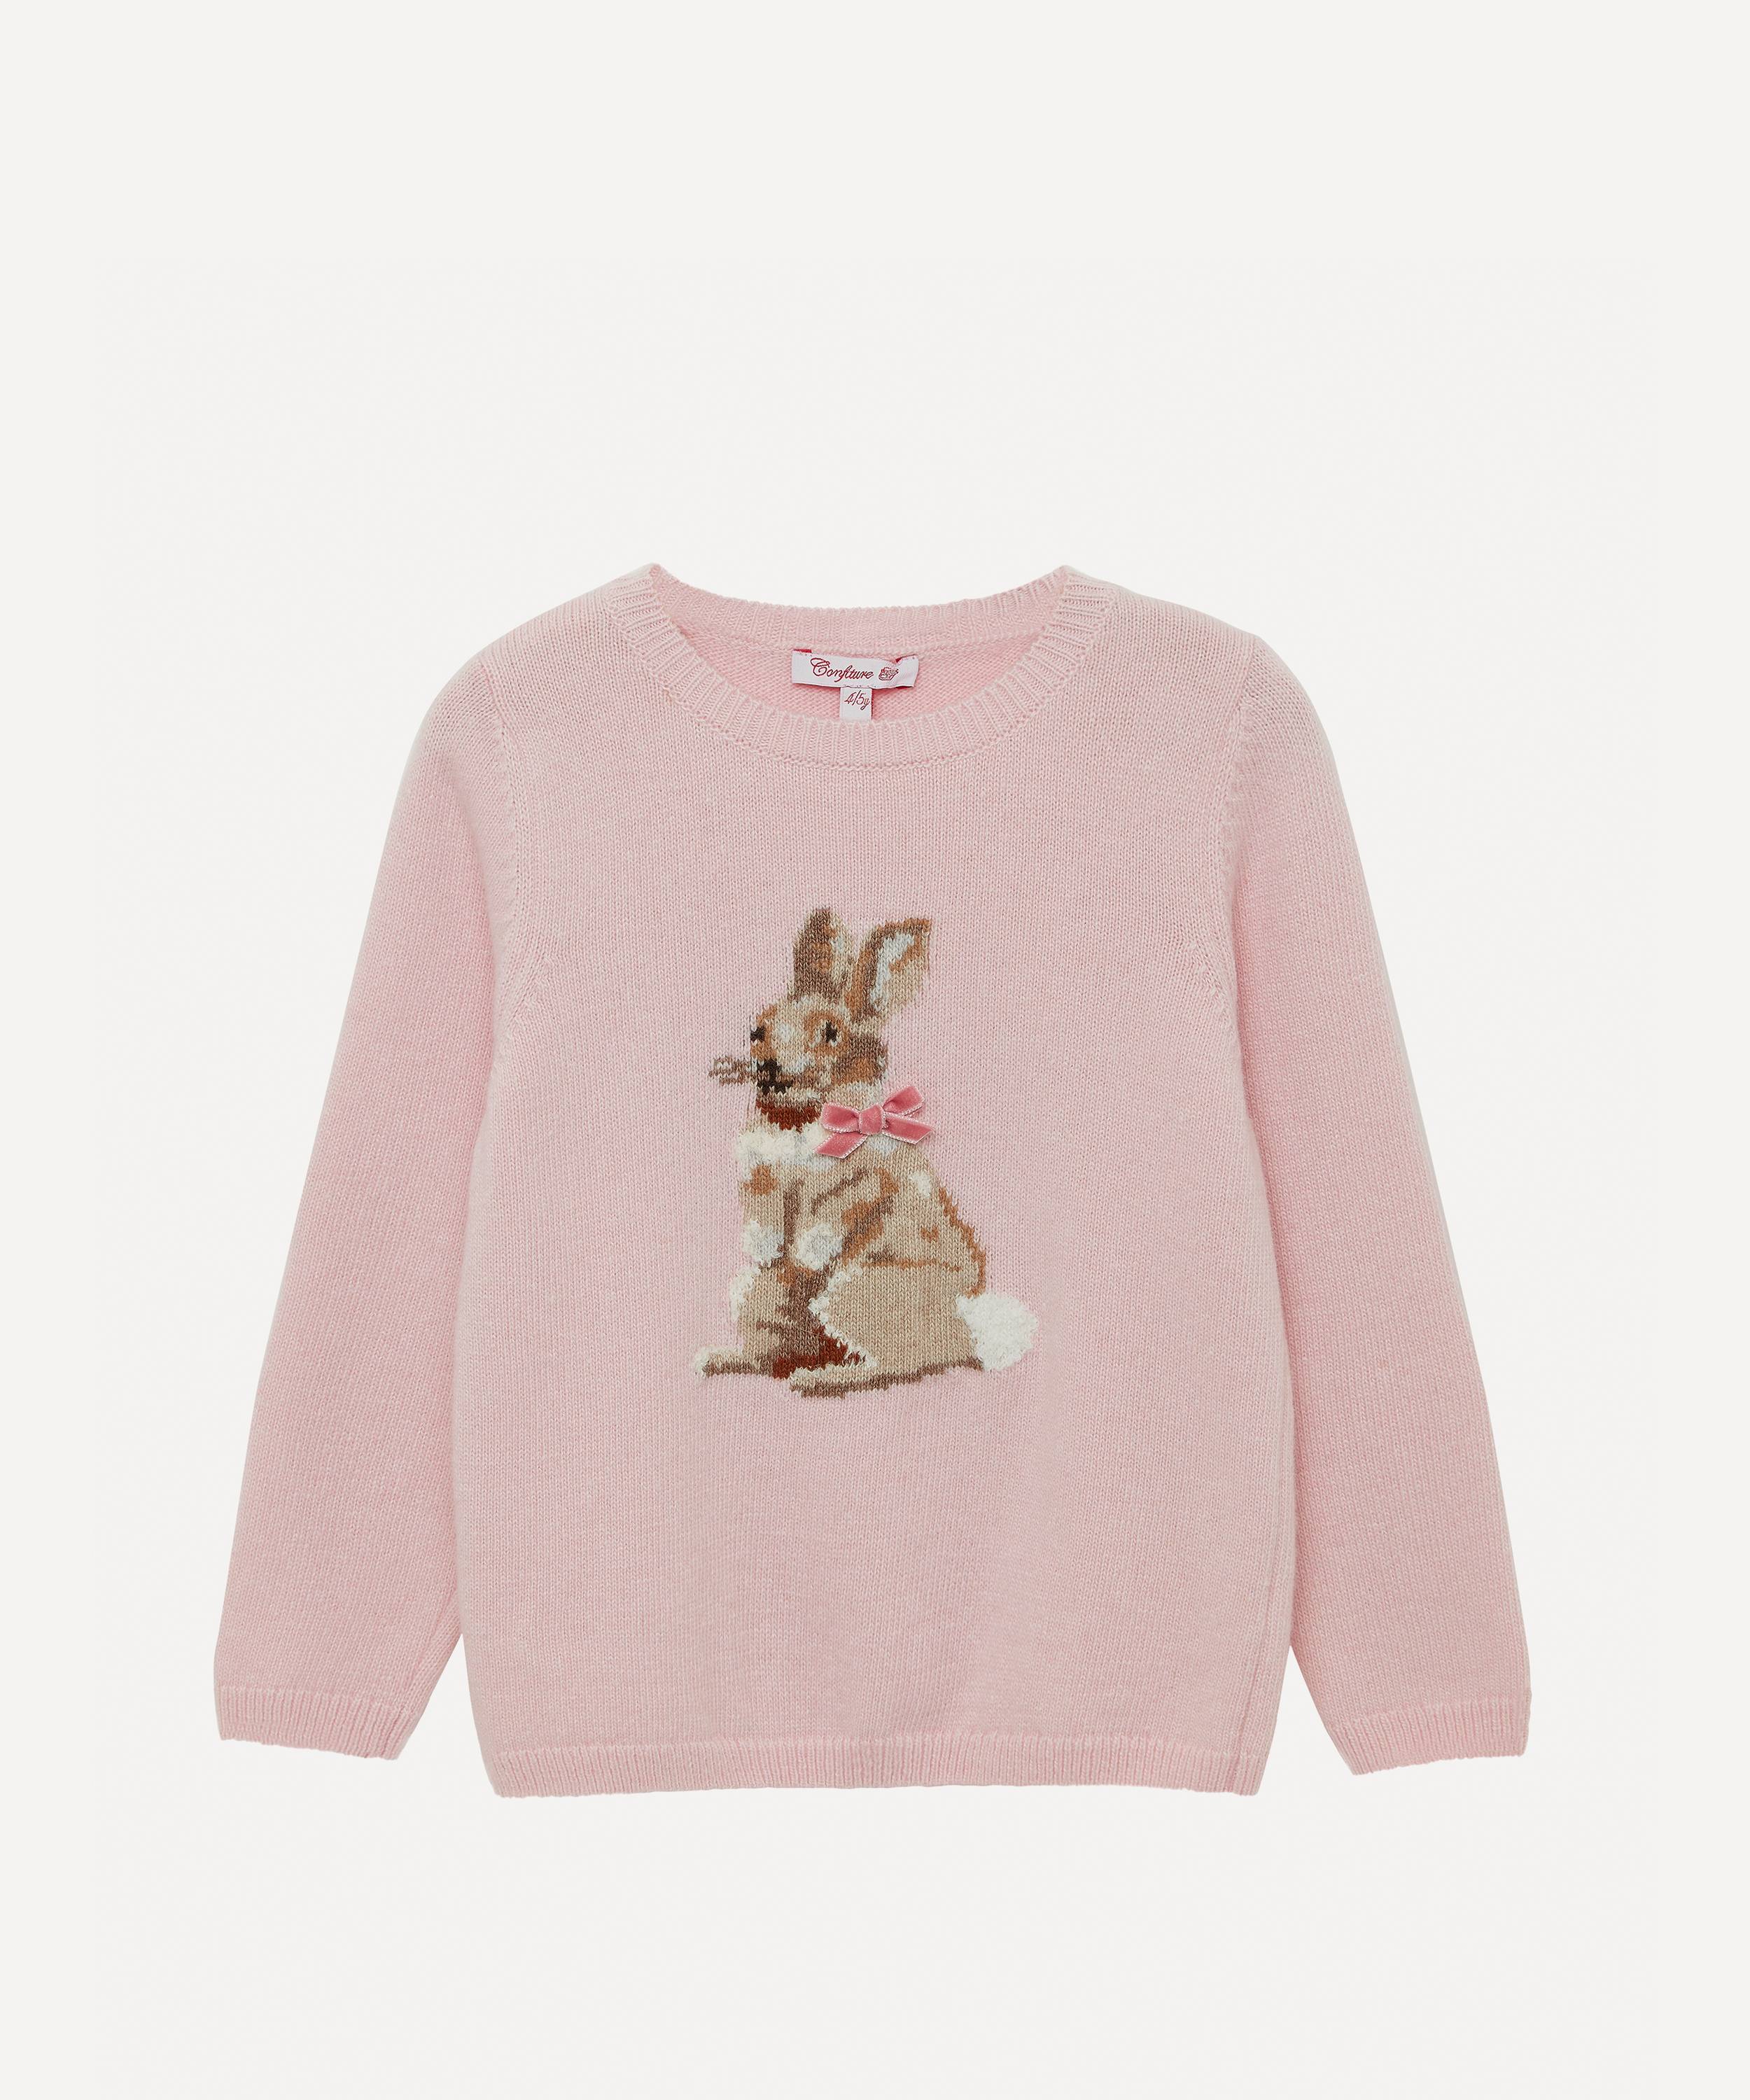 Trotters Bunny Jumper 6-11 Years | Liberty